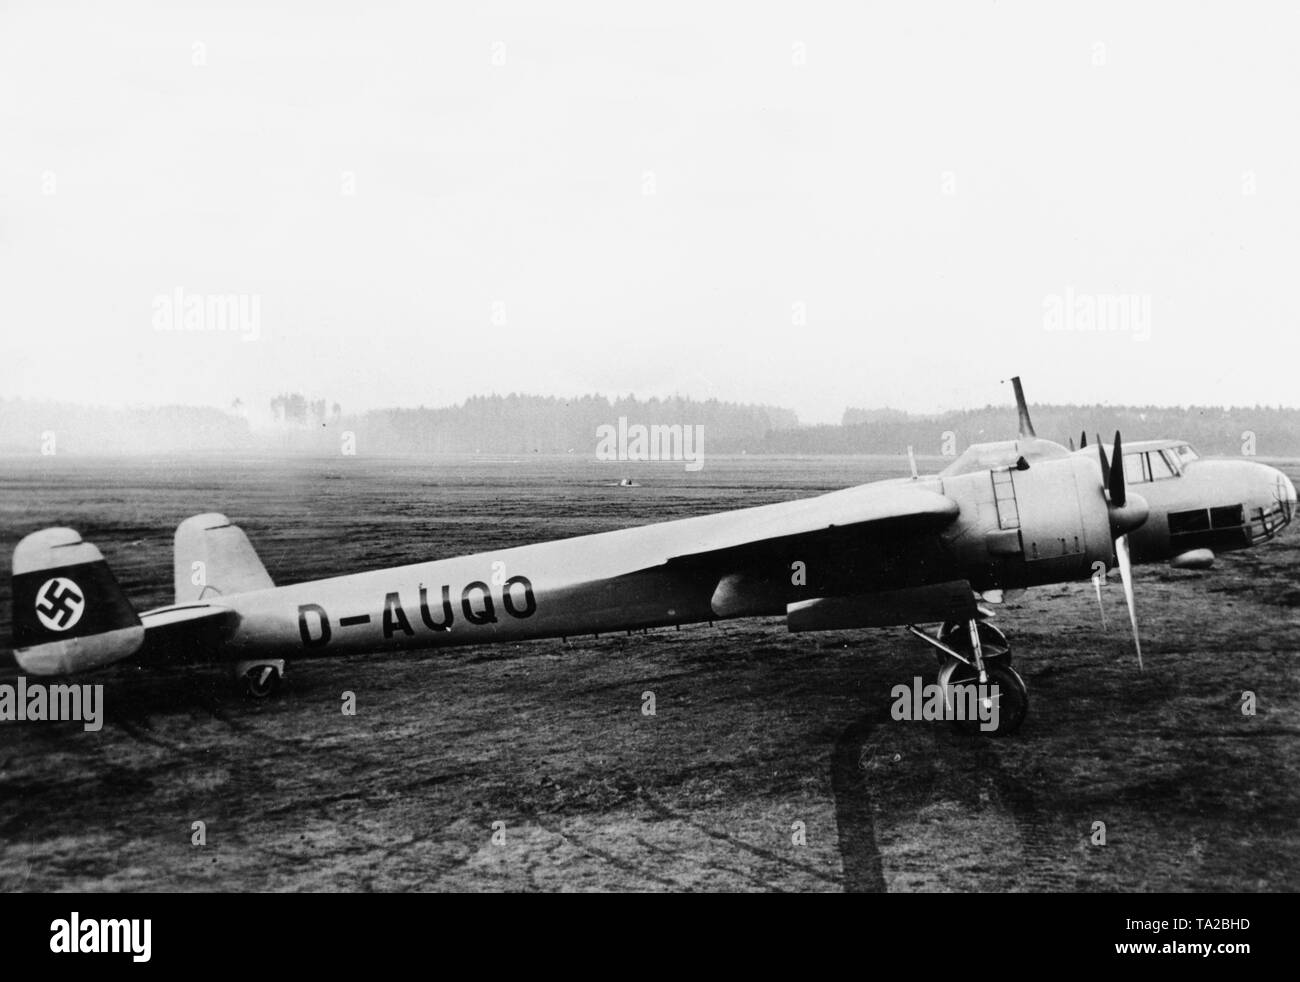 Dornier Do 17 Ausf. M combat aircraft, already with air-cooled engines but still without floorpan, with the registration D + AUQO. Stock Photo